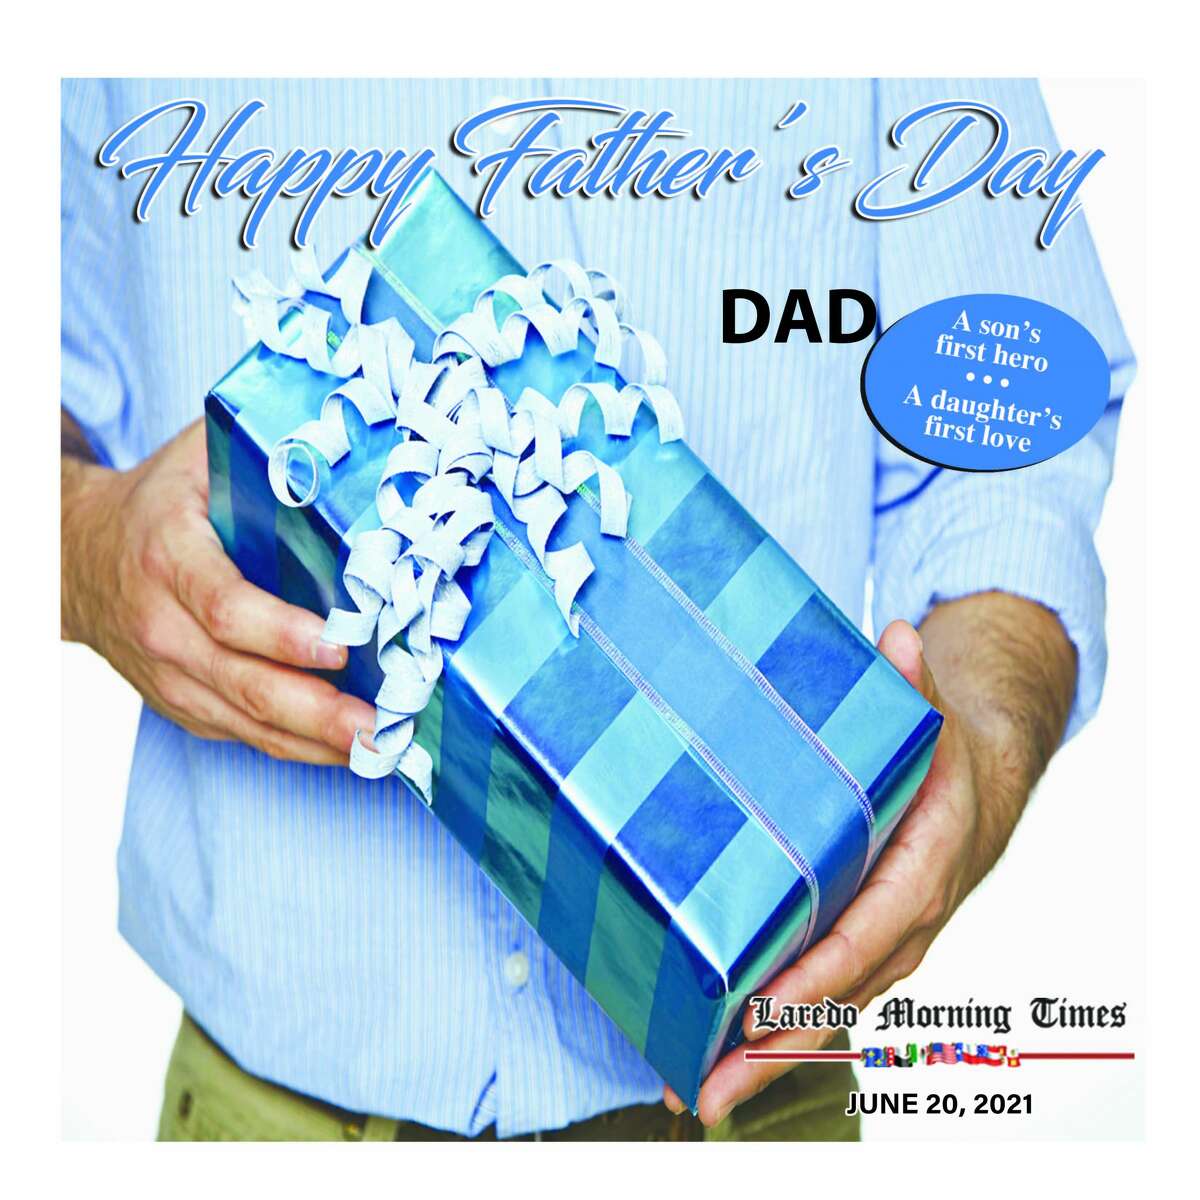 LMT readers celebrated their dads in our Fathers' Day special section.